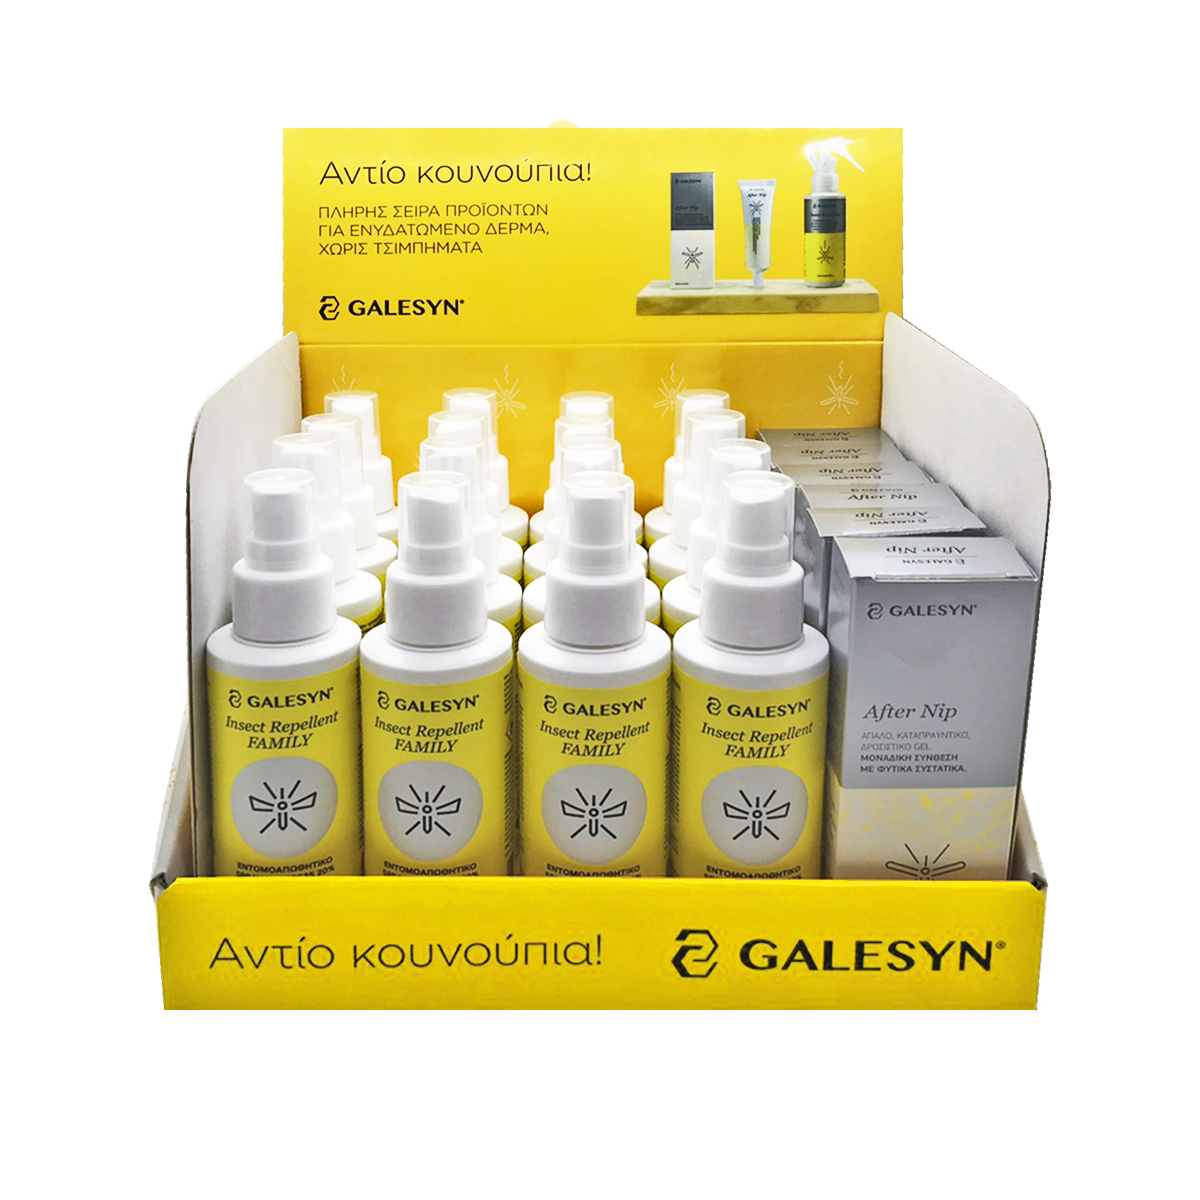 Galesyn Stand Αντικουνουπικών (περ. 16τμχ Insect Repellent Family IR3535 & 6τμχ After Nip)